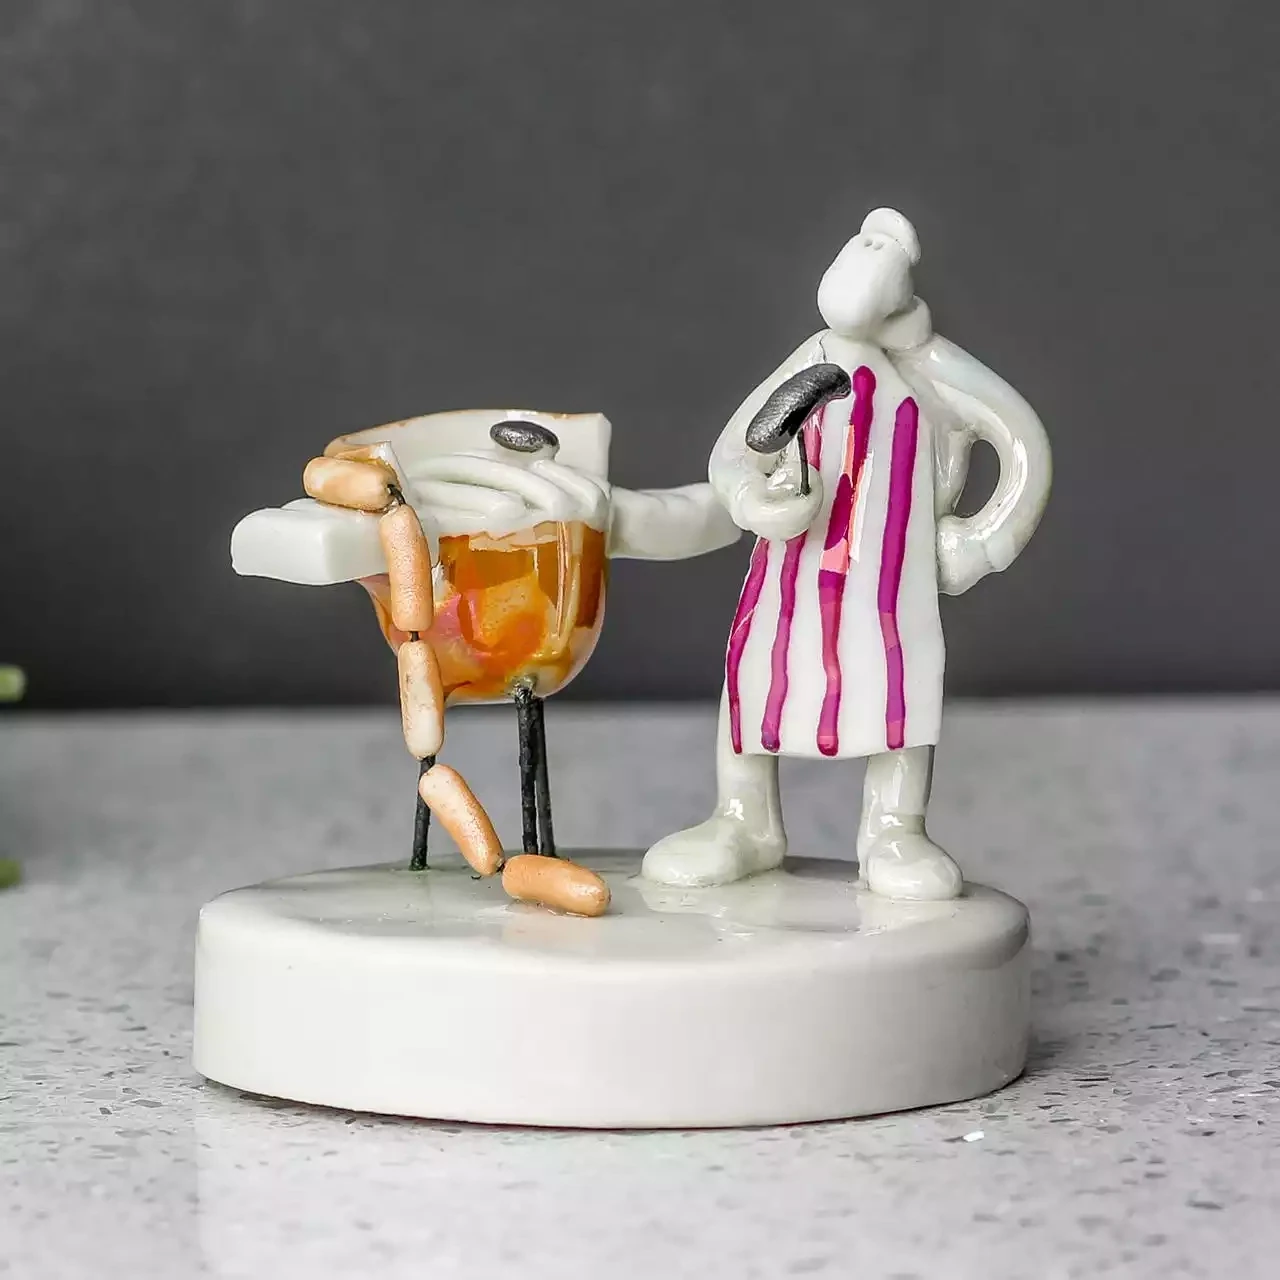 Ceramic Barbecue Master Miniature Sculpture by Andrew Bull